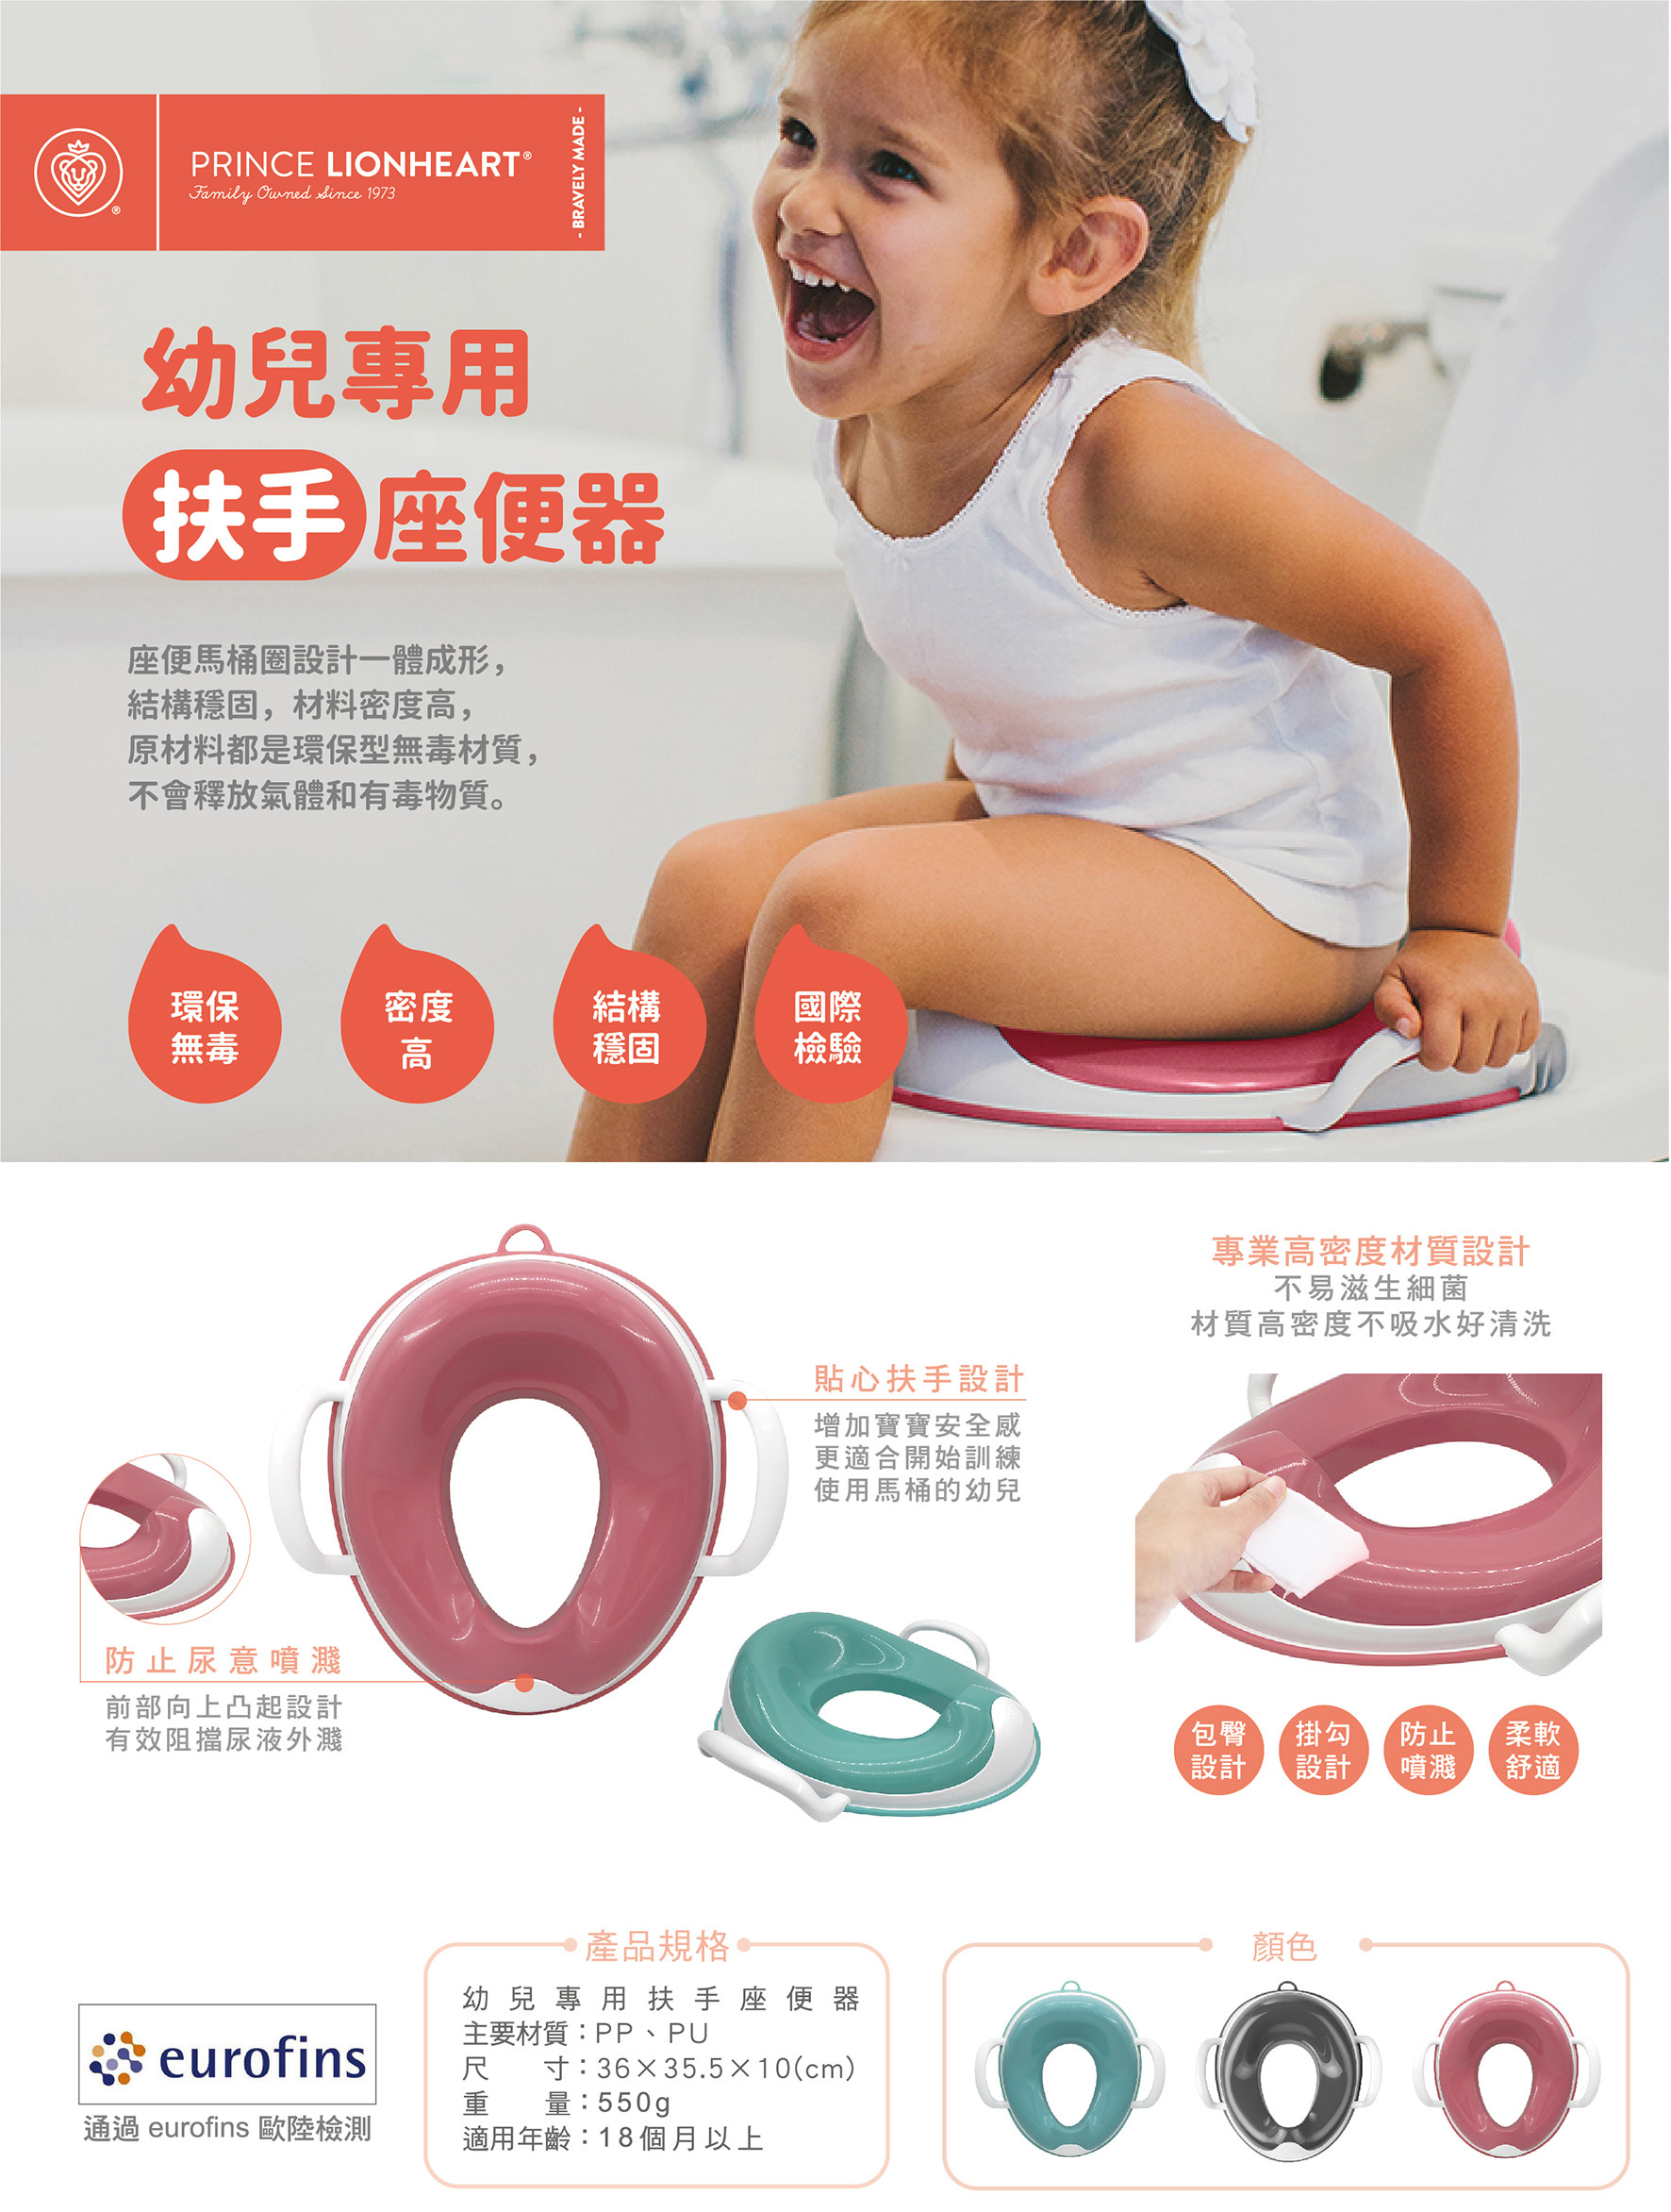 [Prince Lionheart, USA] Armrest toilet for toddlers - 3 colors available